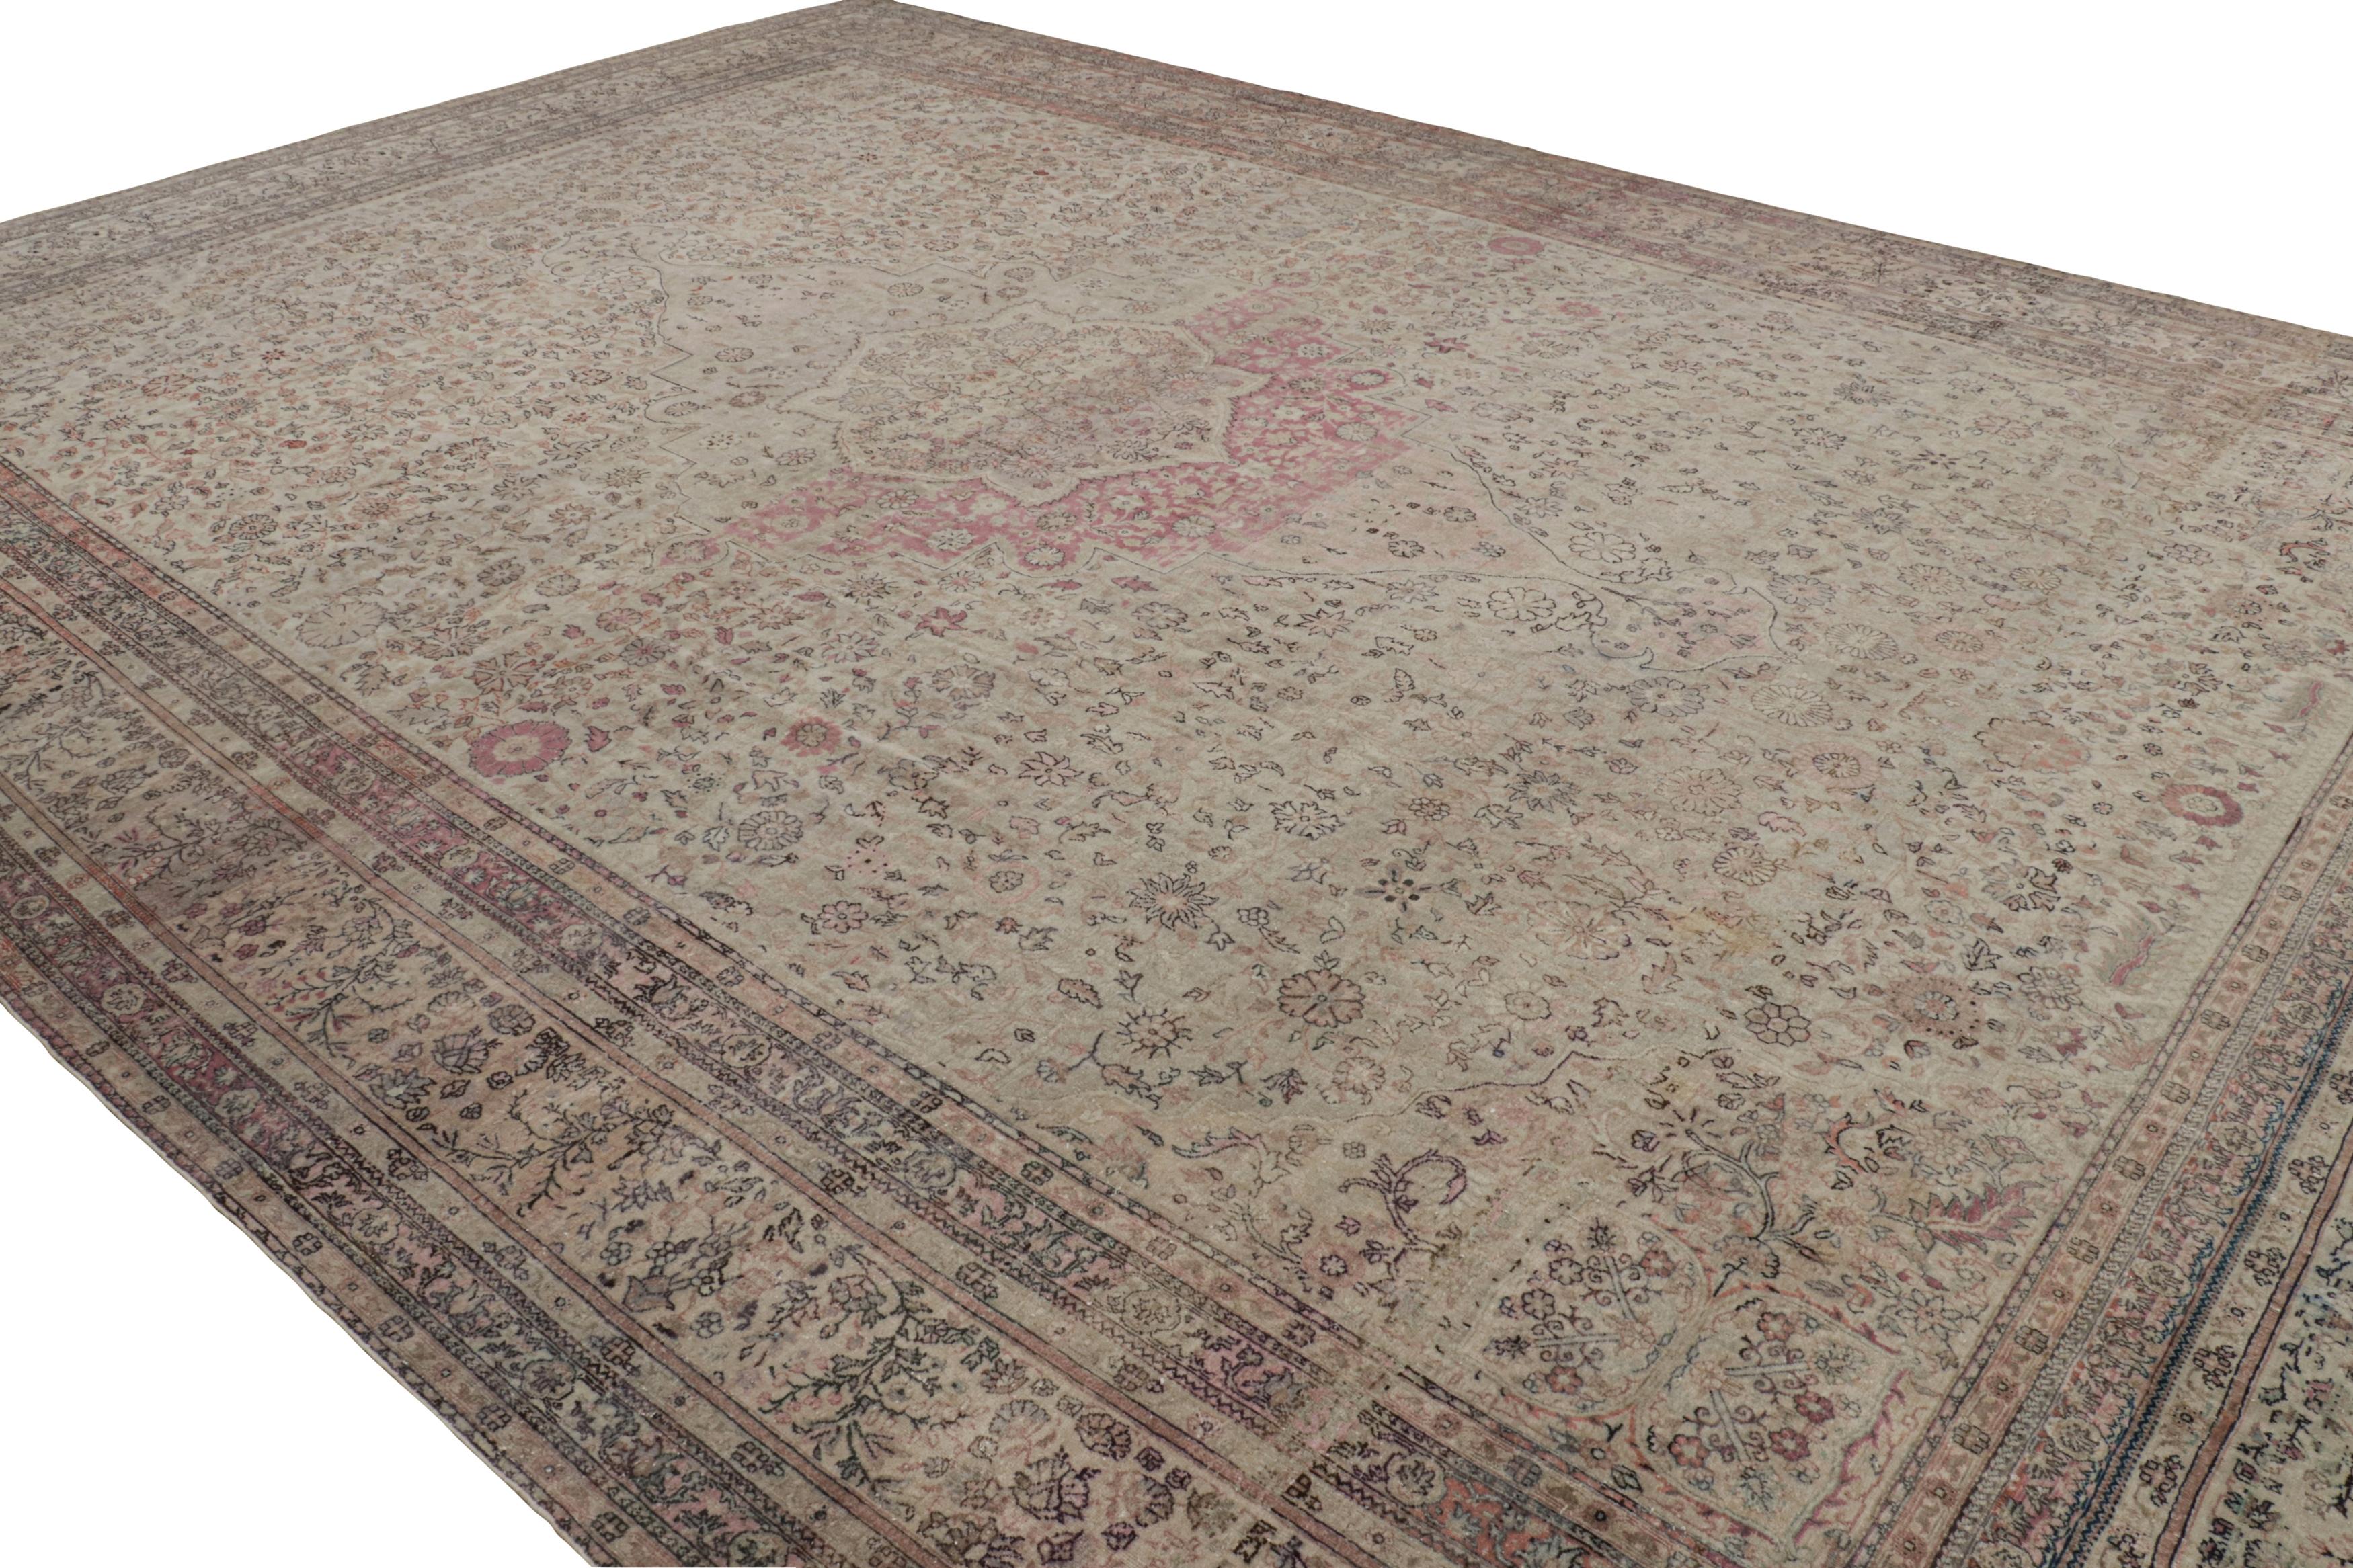 Hand-Knotted Oversized Antique Sivas Rug in Beige and Red Floral Patterns, from Rug & Kilim For Sale